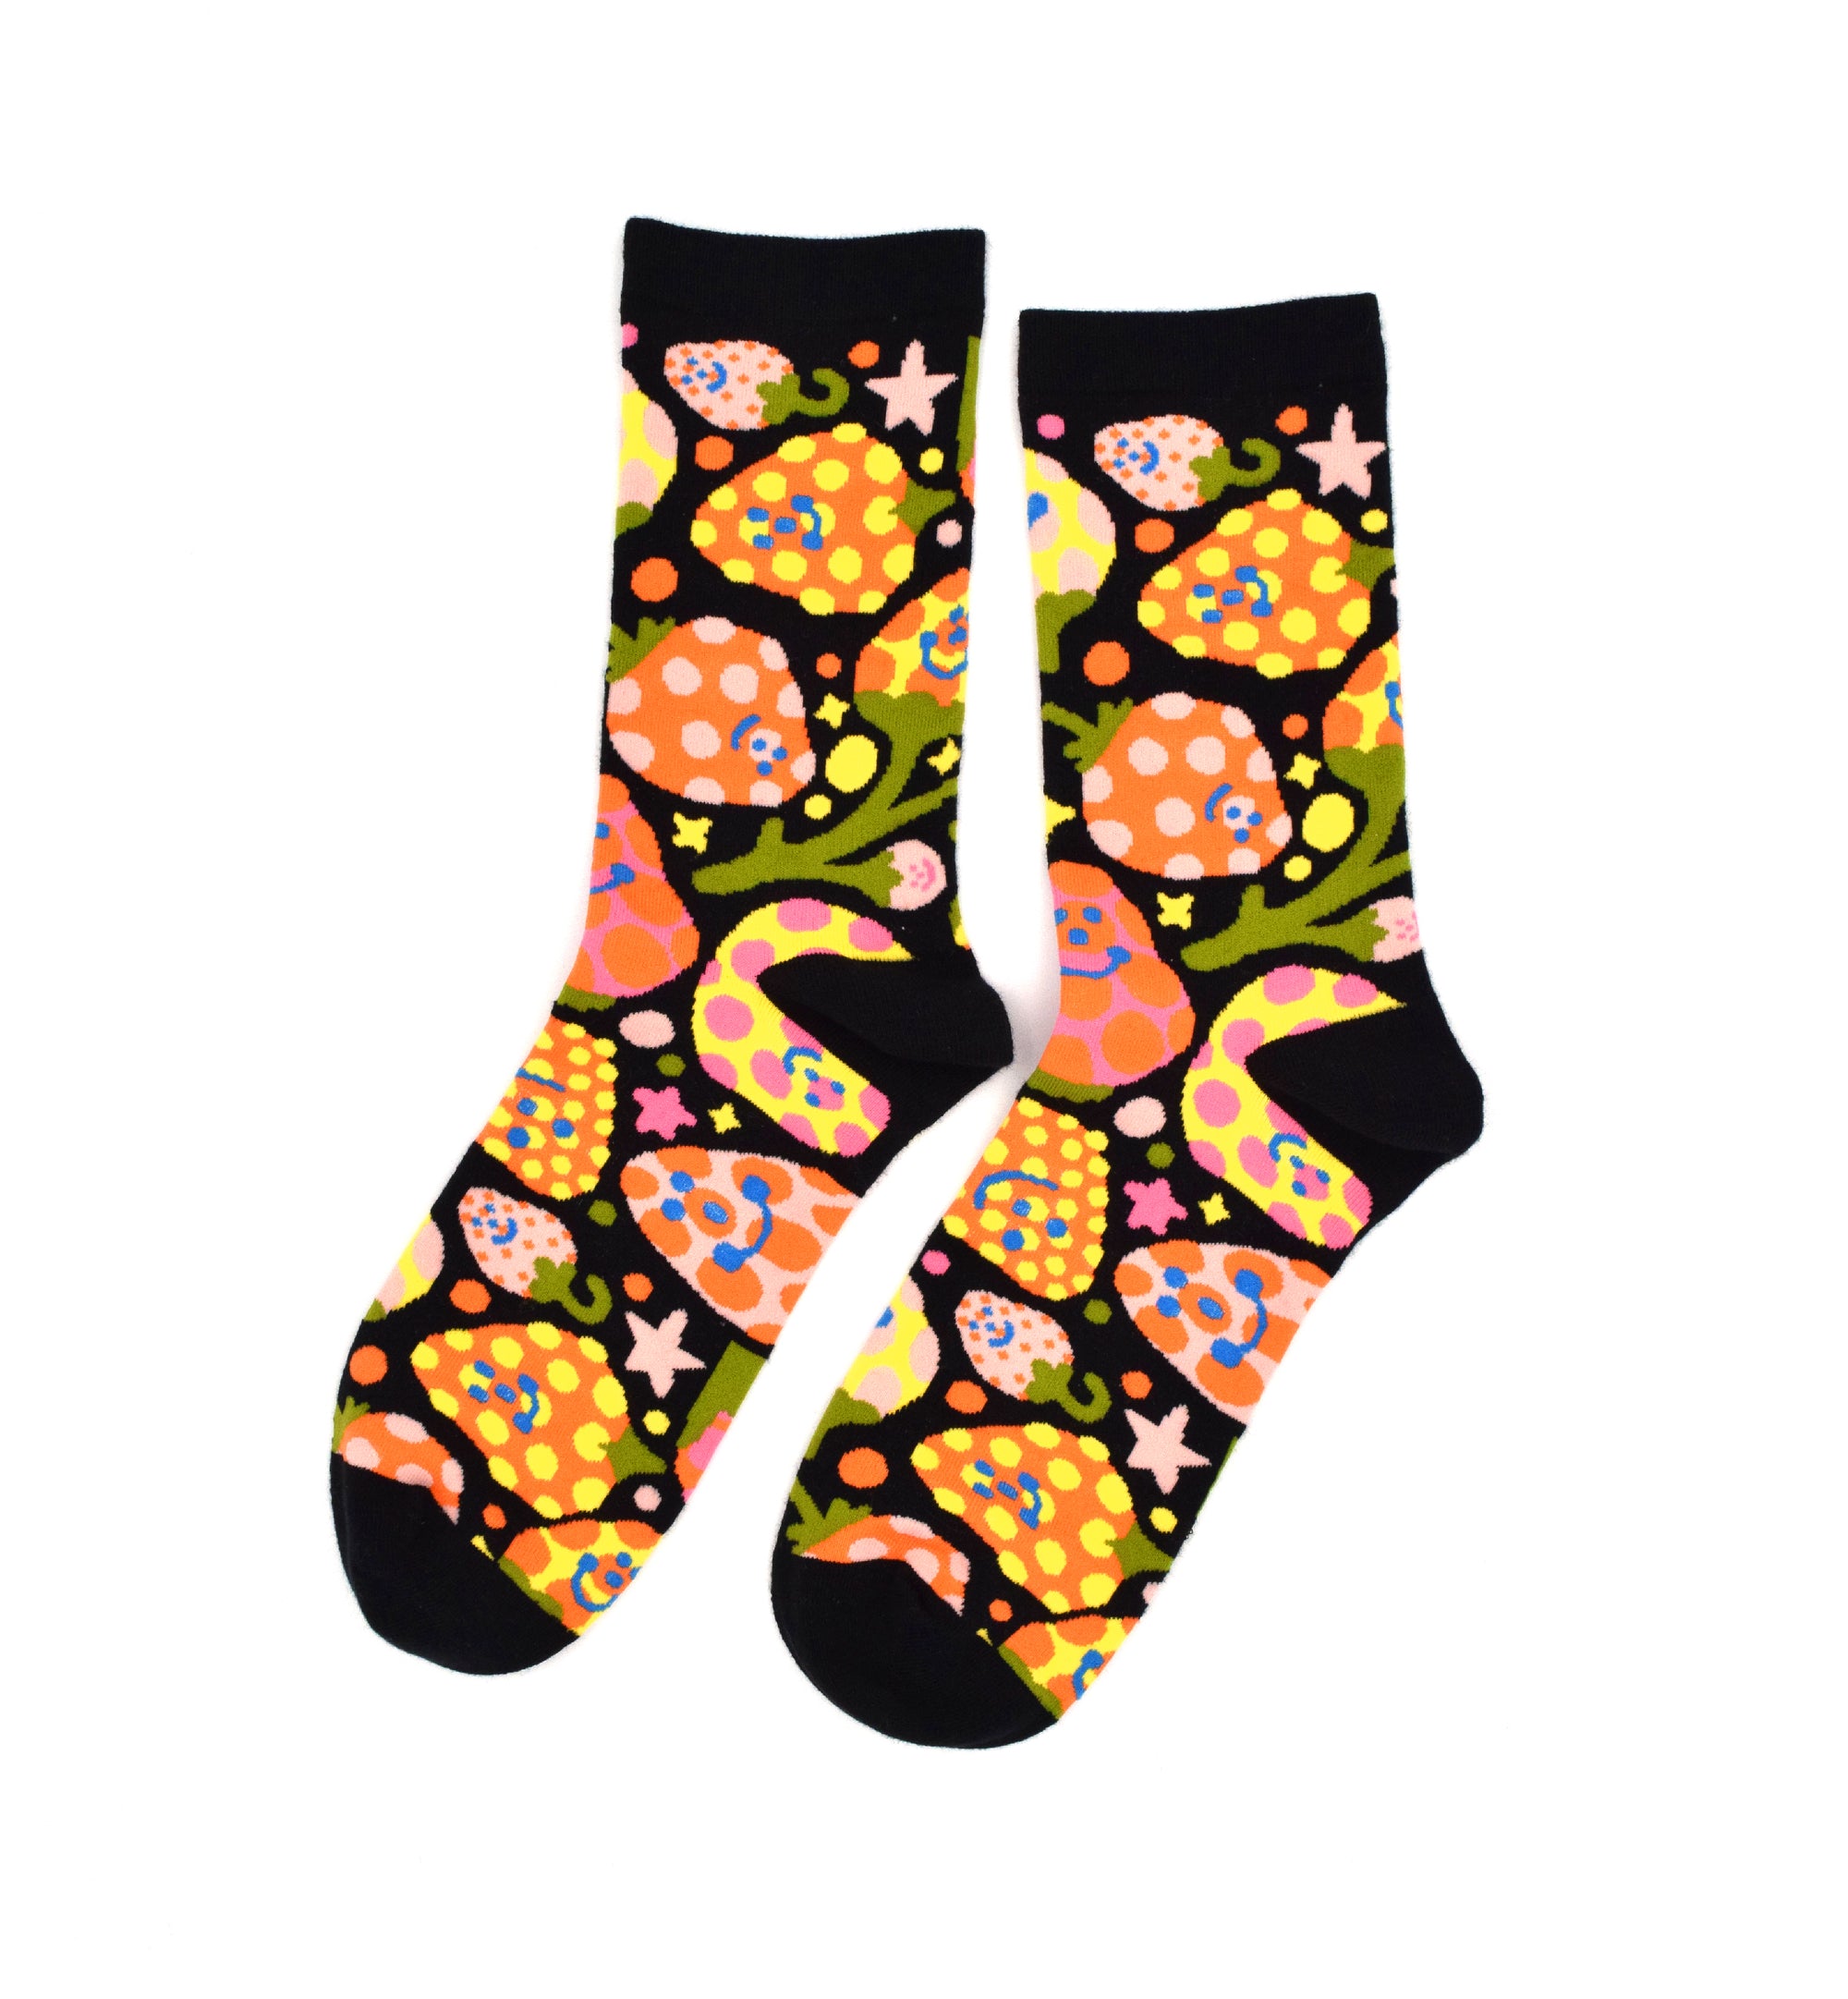 Good Store - Awesome Socks Club - Subscription